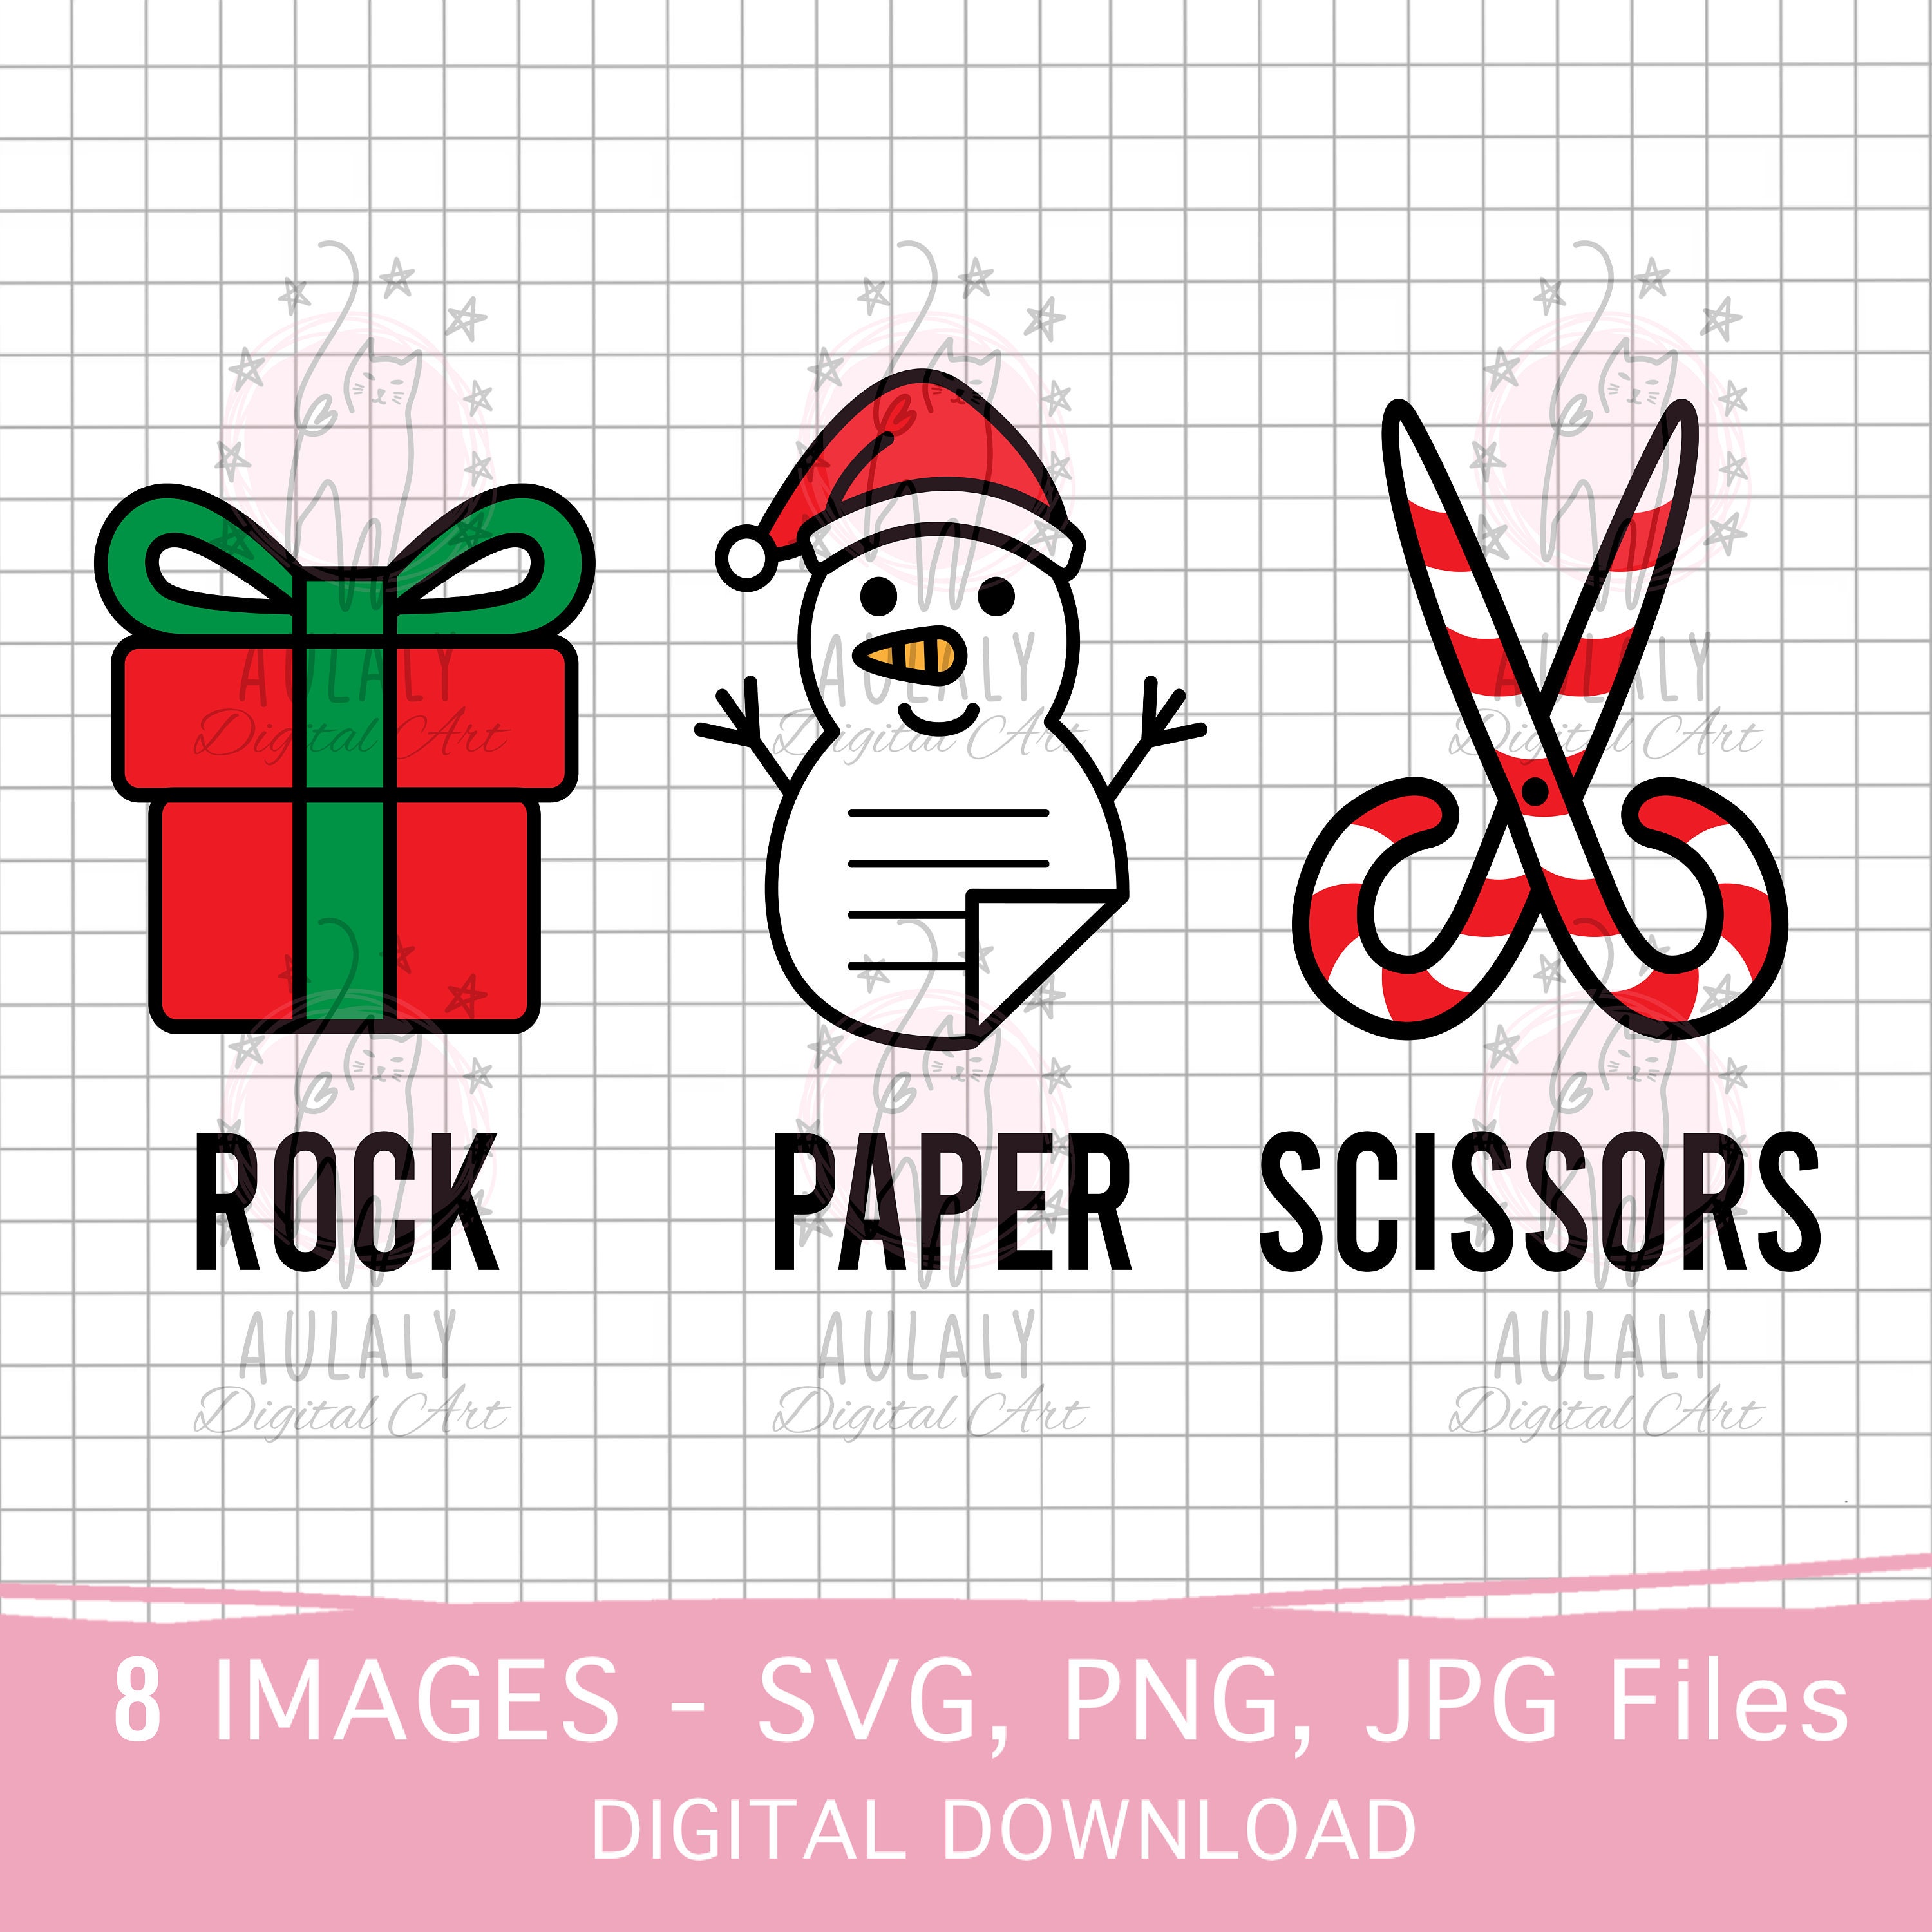 Tactical Scissors Vector Images SVG Files Digital Cutting Files Ai Eps PNG  DXF Svg 